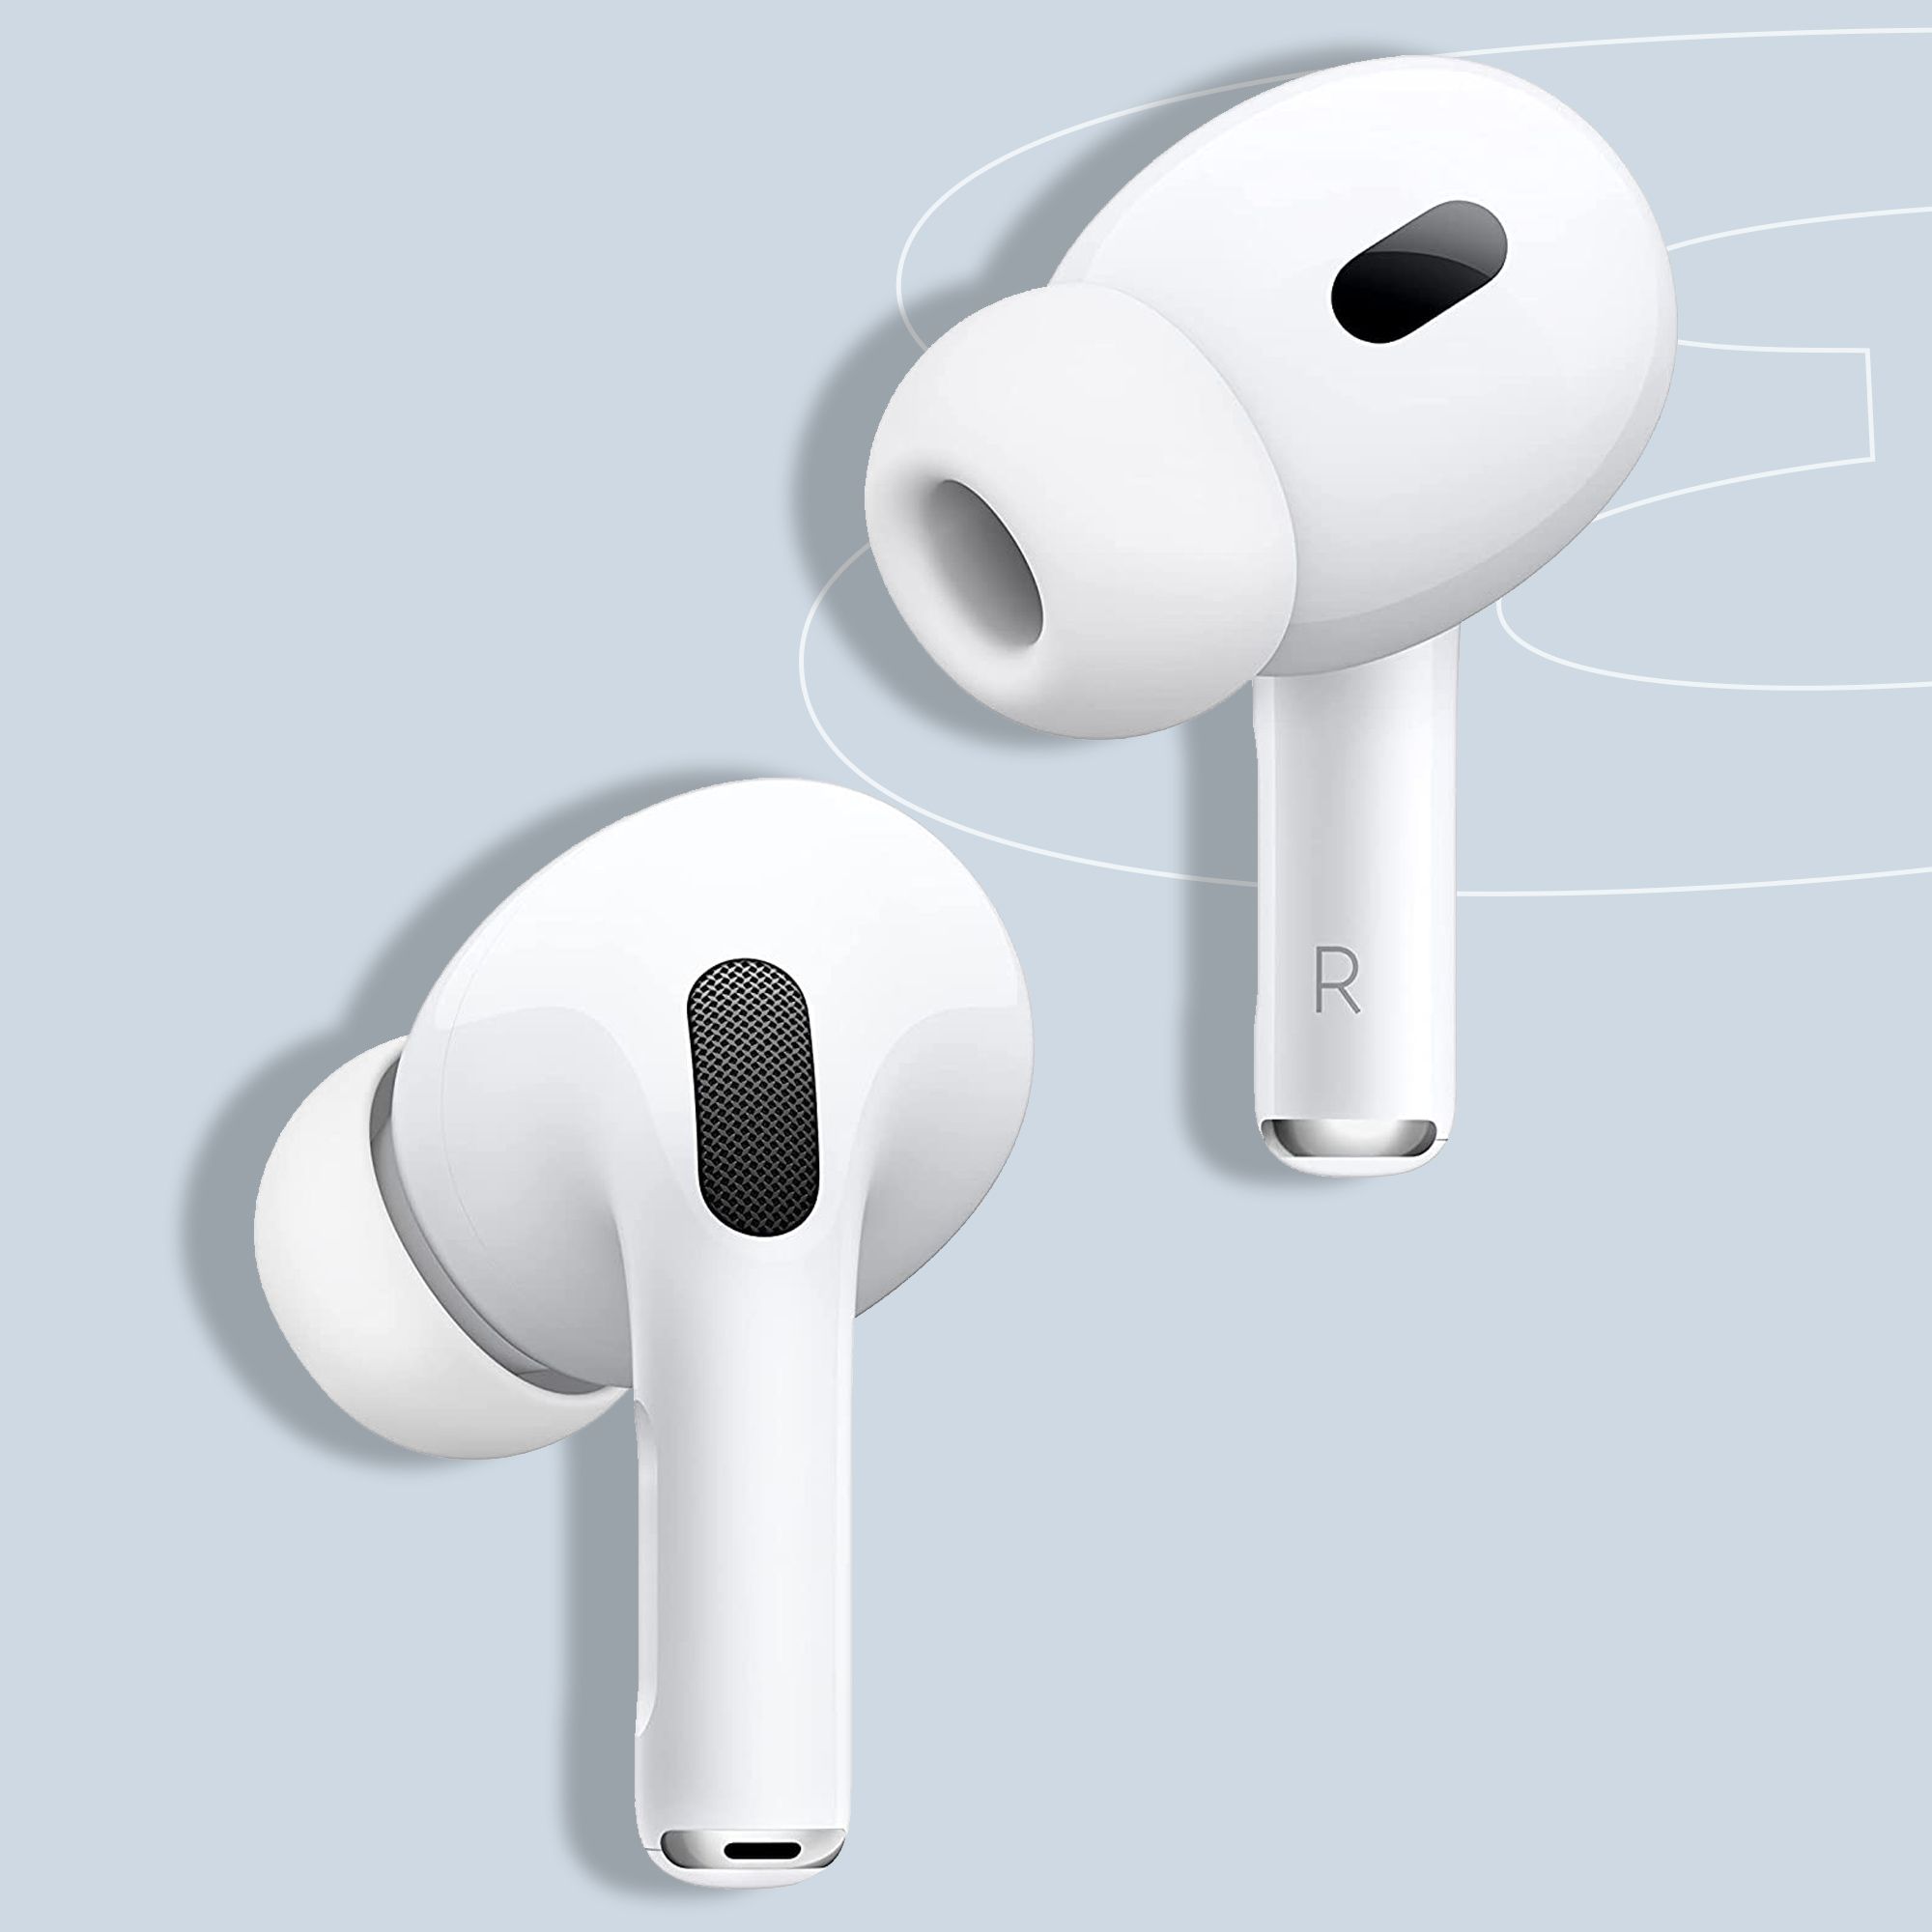 Amazon Is Shaving 20% Off the Apple AirPods Pro